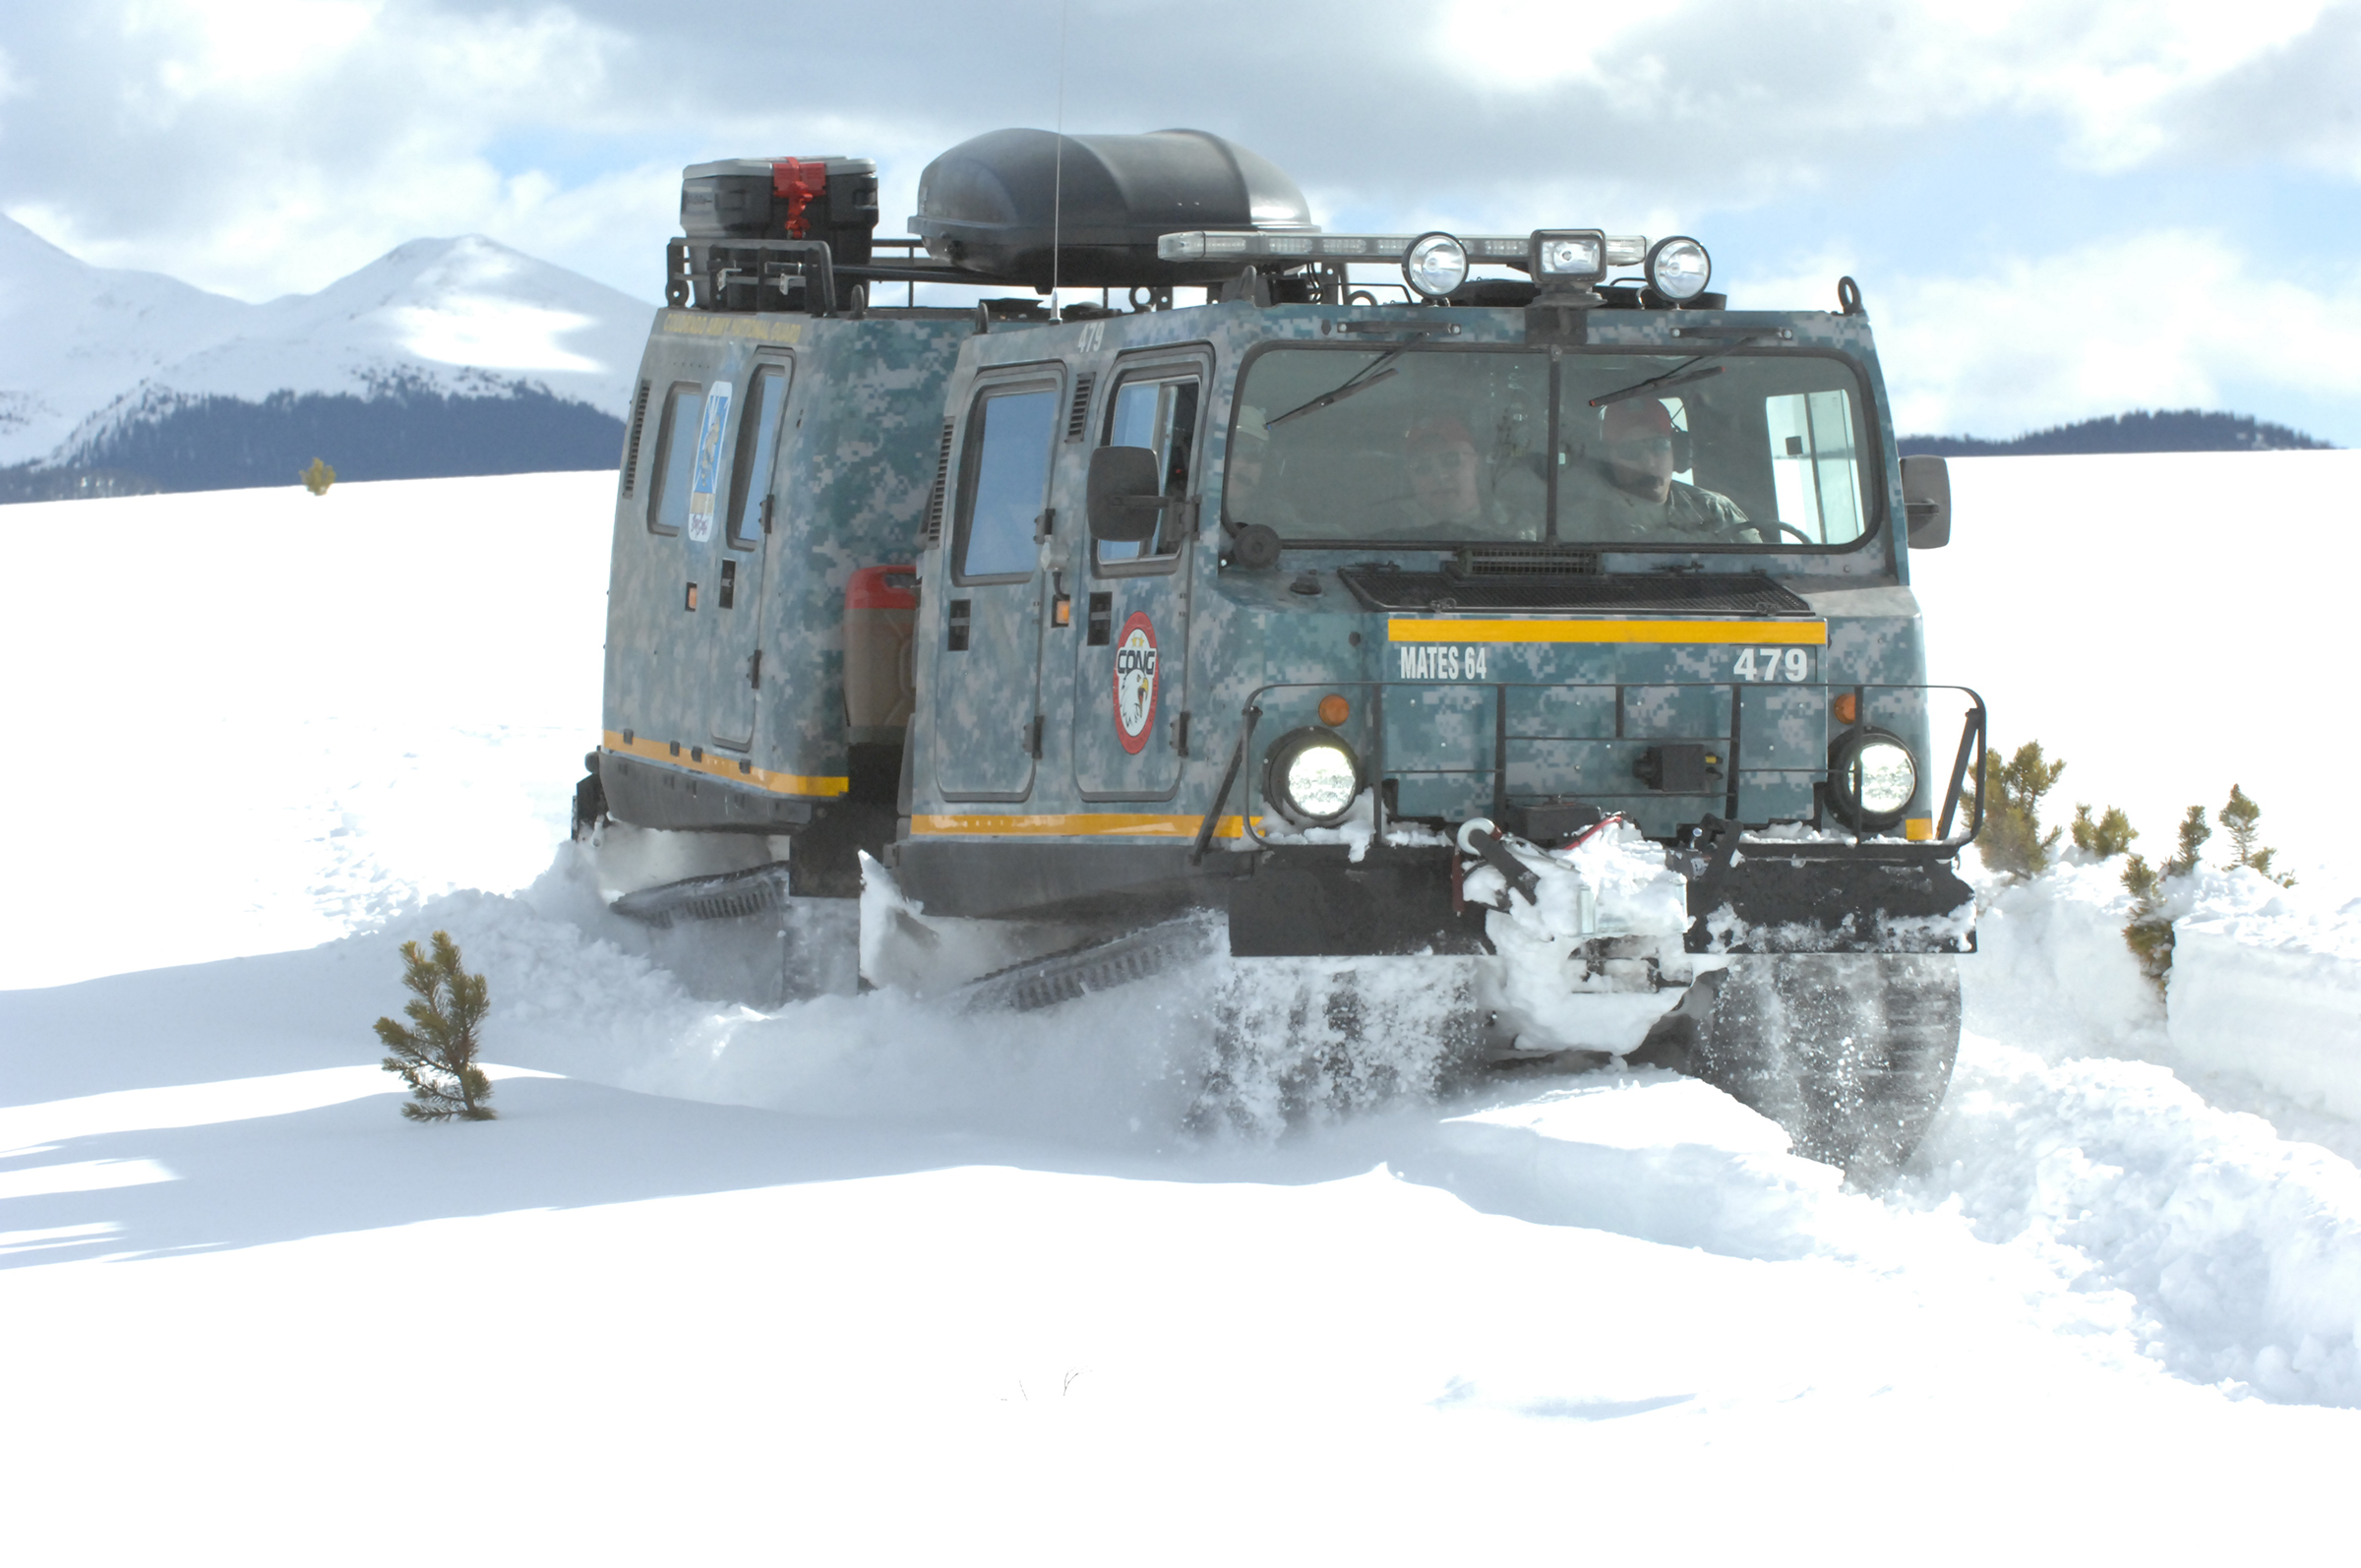 An M973A1 Small Unit Support Vehicle (SUSV) clad in emergency lights and digital camouflage, claws its way through the snow at Taylor Park Reservoir near Gunnison, Colo., March 15, 2010